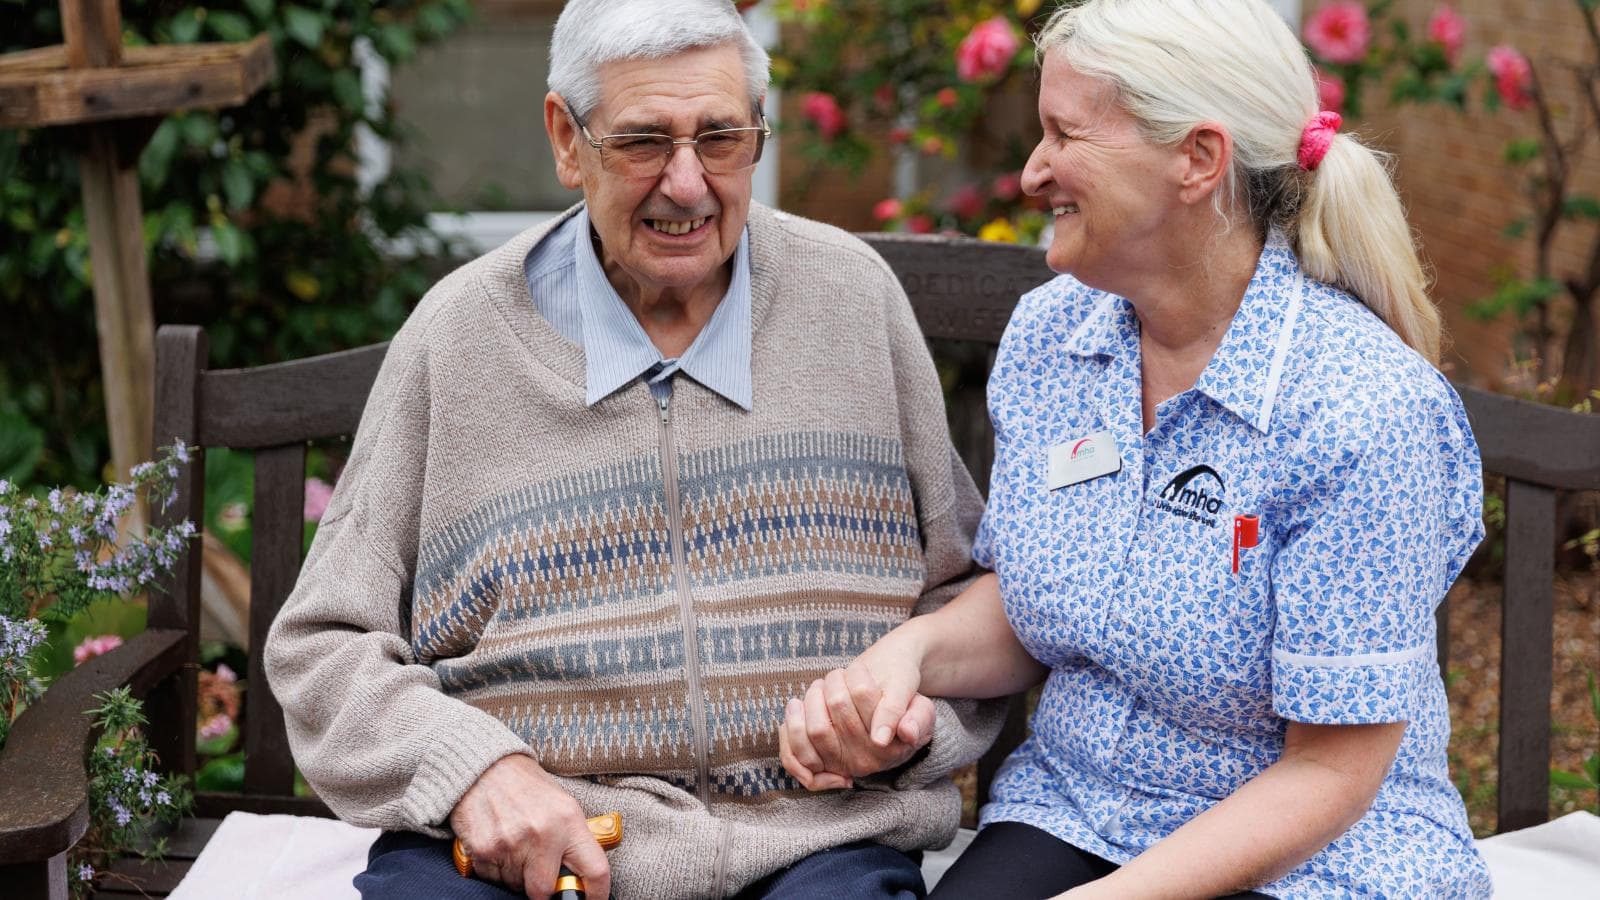 A care assistant sits with a resident in the garden.